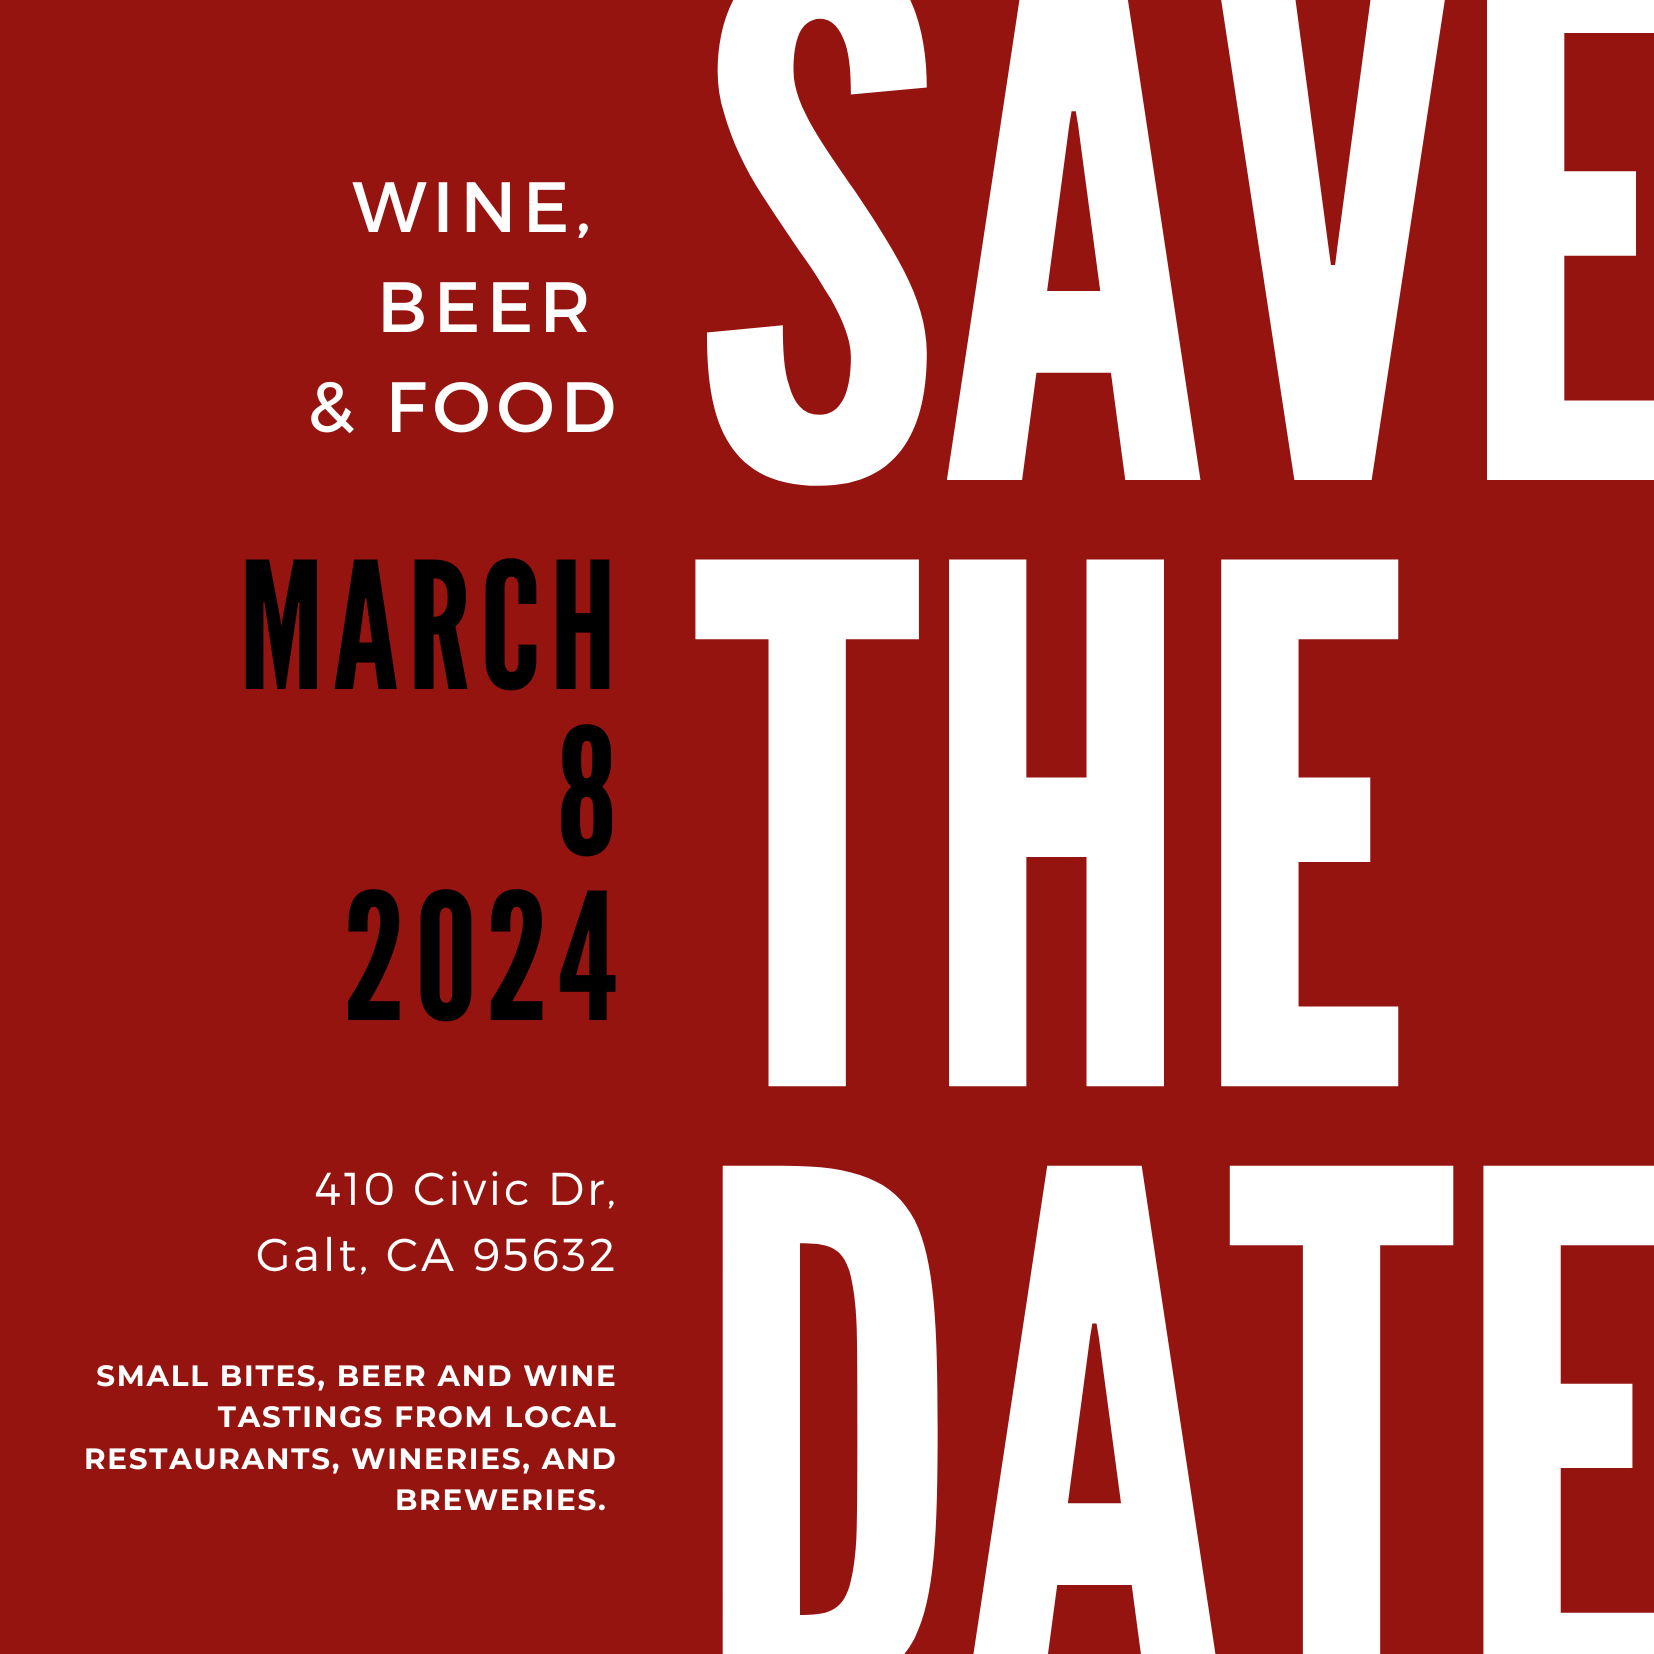 WBF Save the date